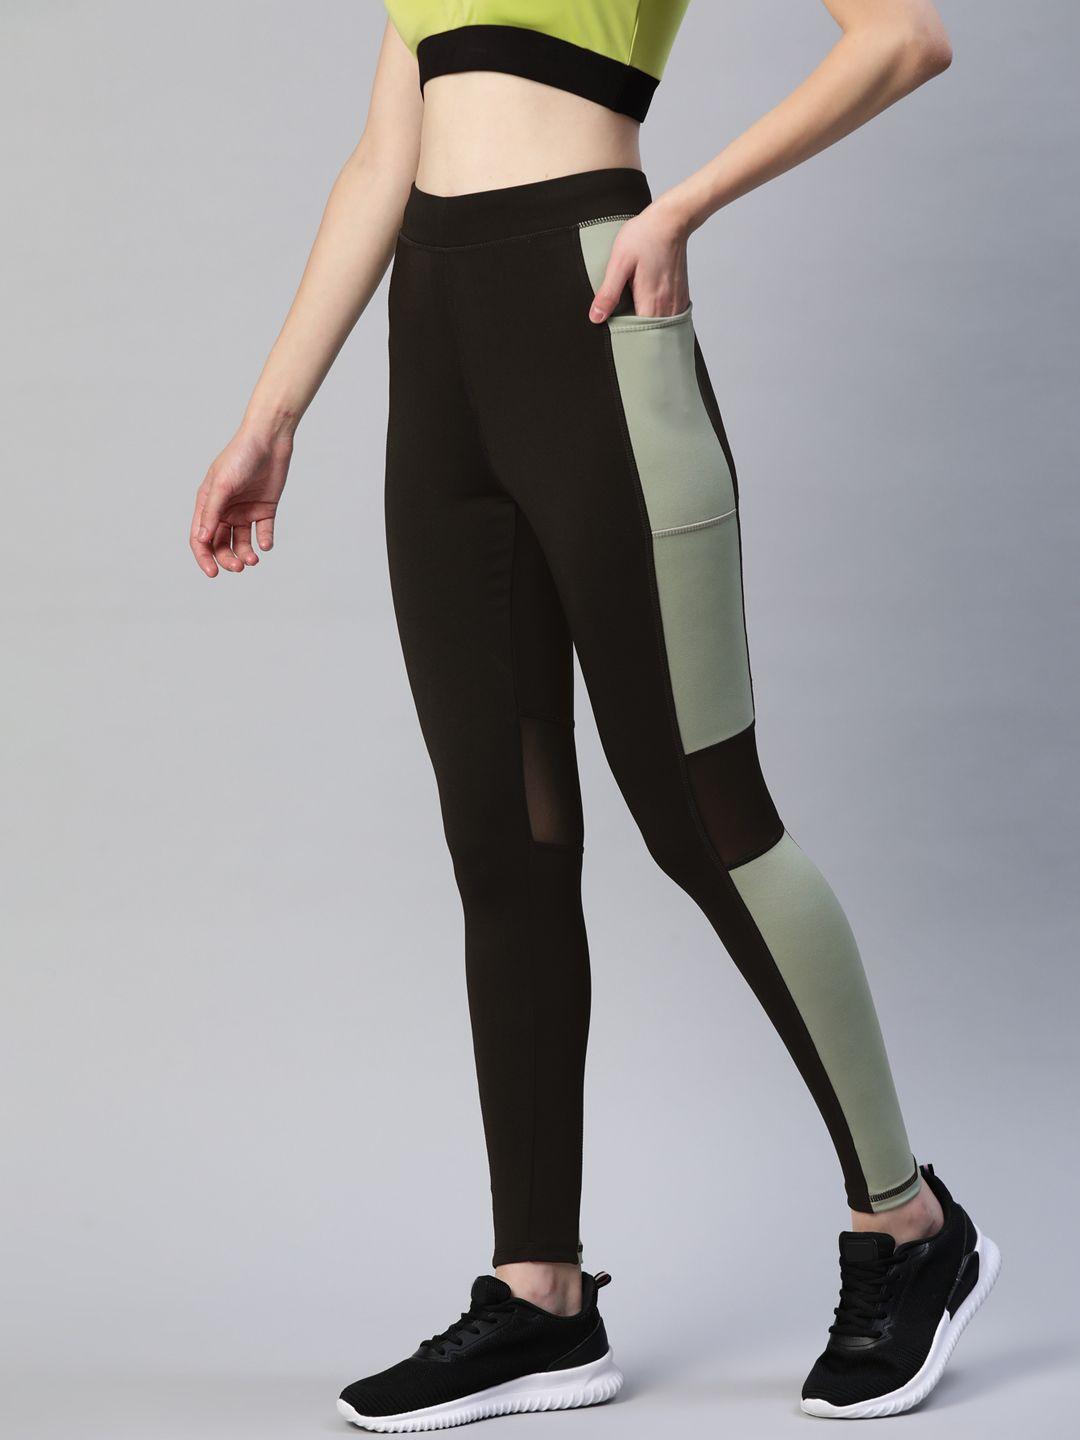 blinkin women black & olive green rapid dry tights with breathable mesh & side panels